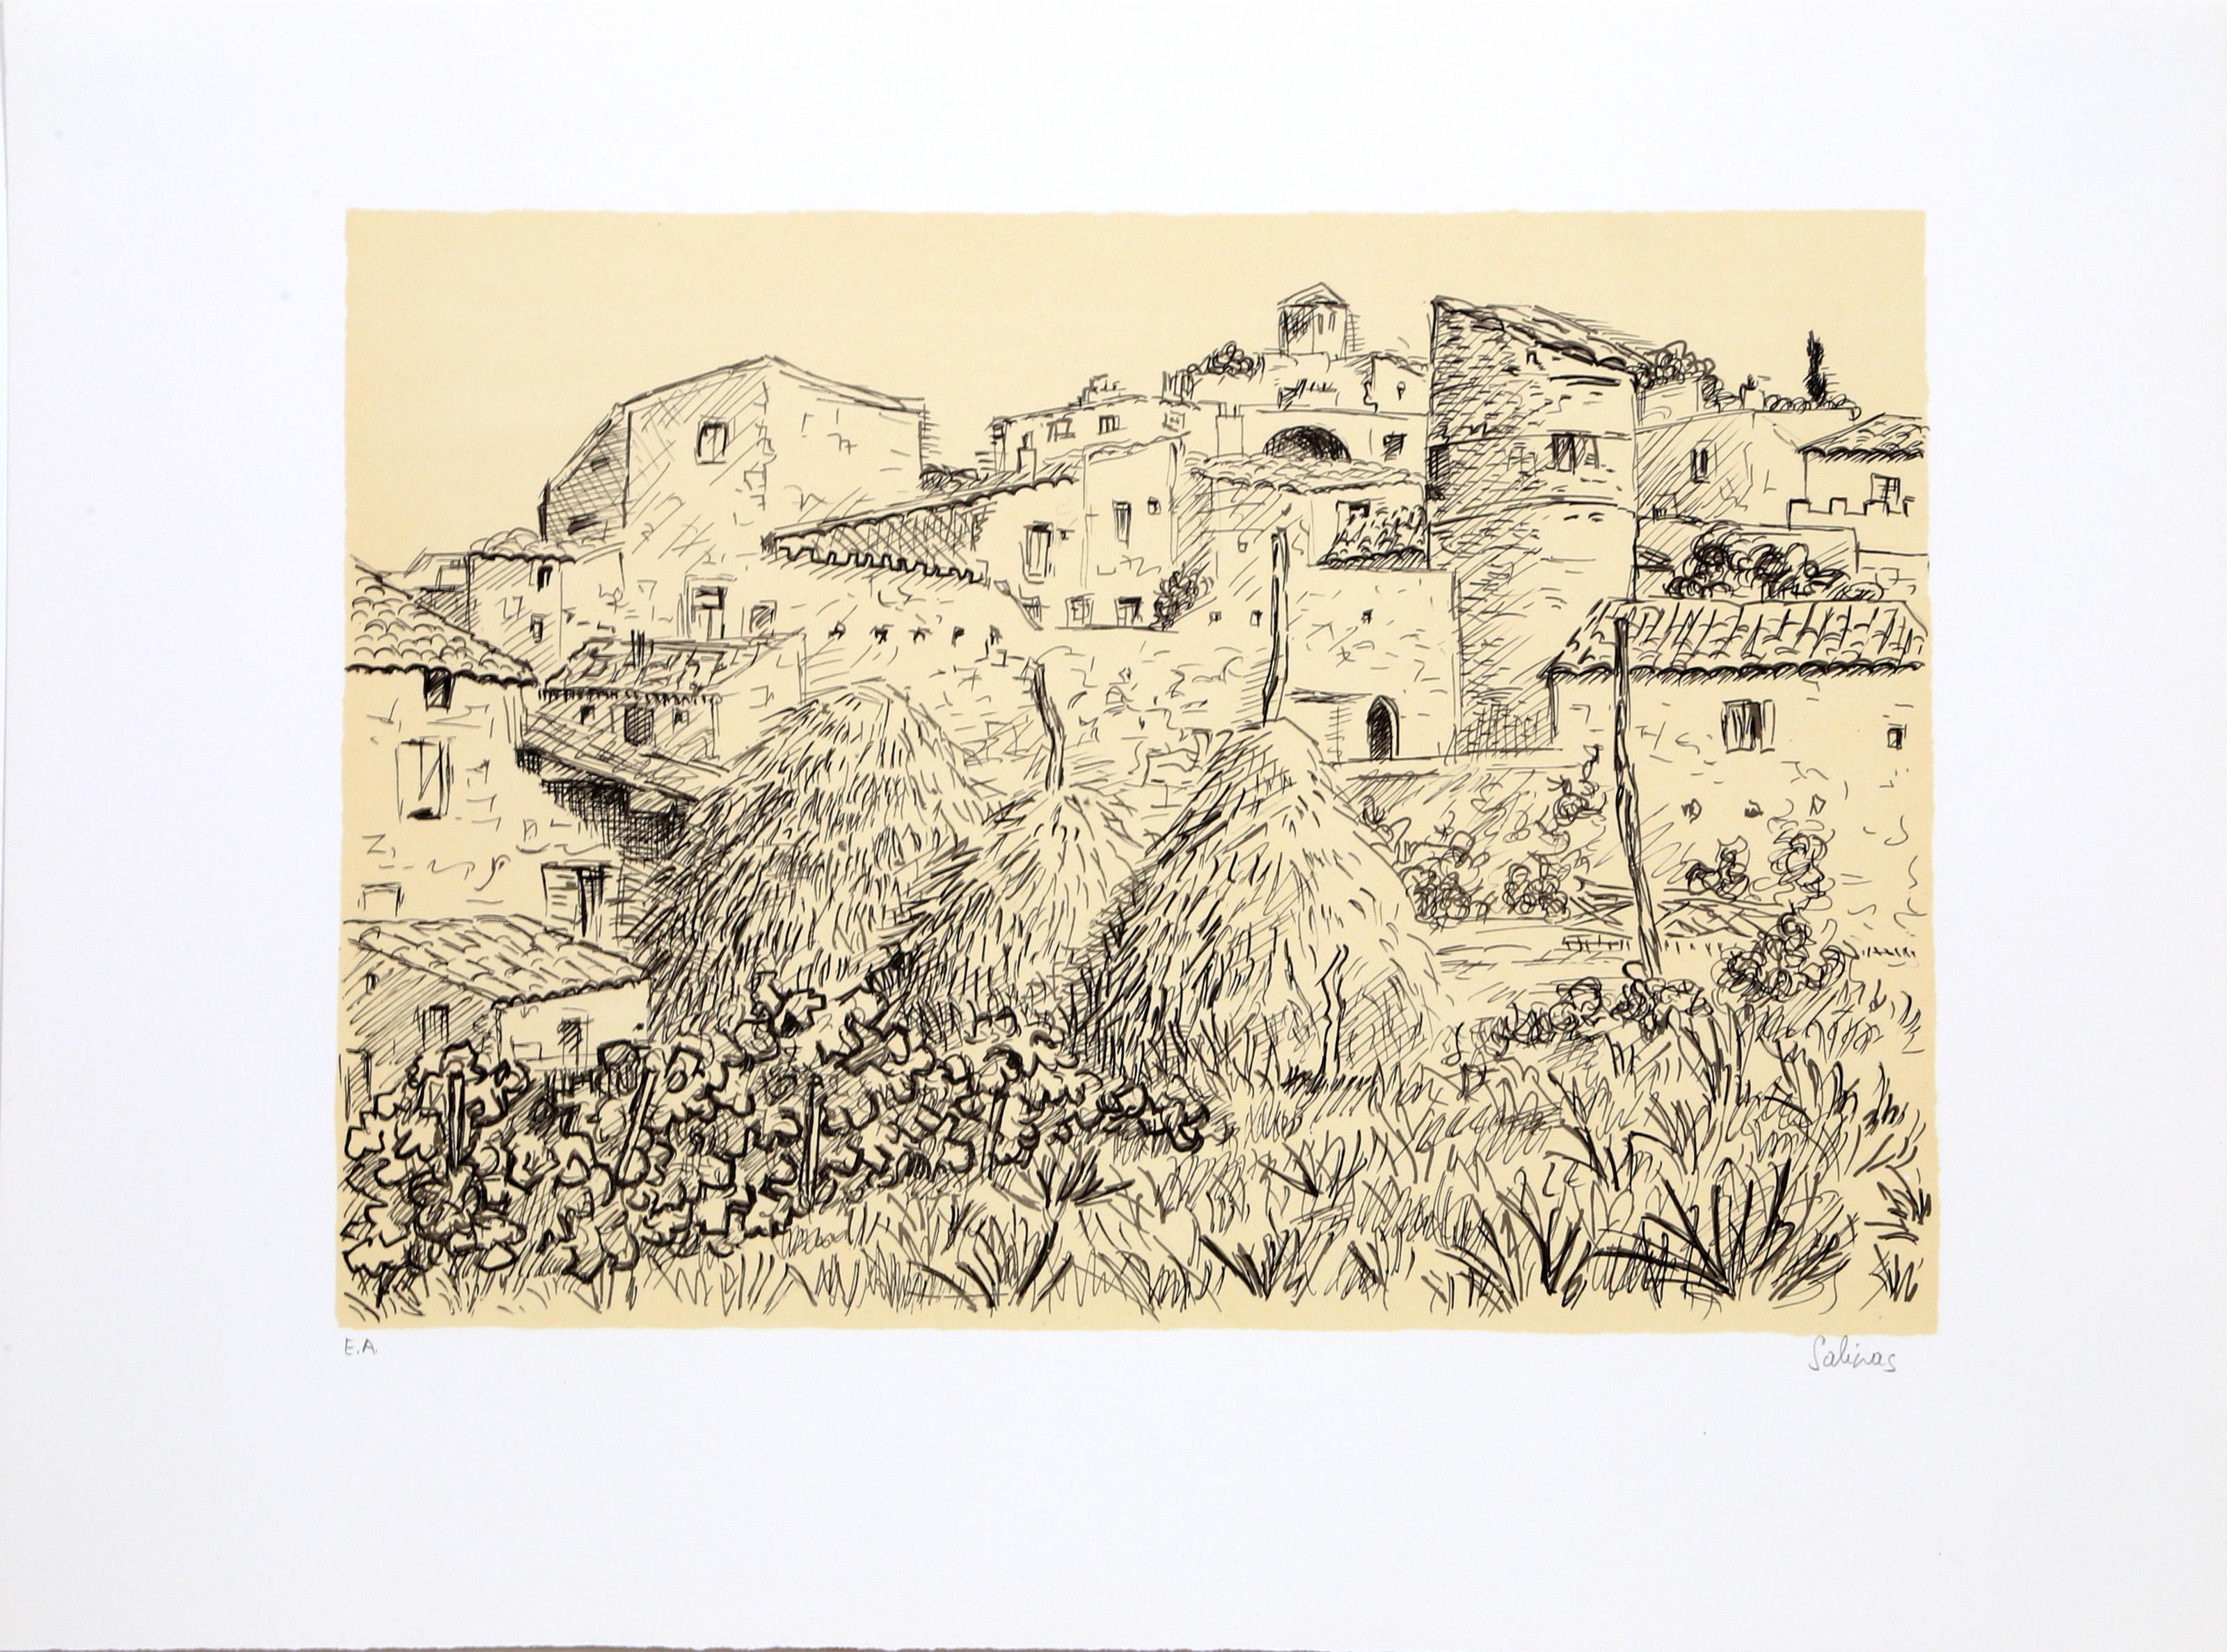 Laurent Marcel Salinas, Egyptian/French (1913 - 2010) -  French Villa. Year: Circa 1980, Medium: Lithograph, signed in pencil, Edition: EA, Image Size: 13 x 18 inches, Size: 19  x 25.5 in. (48.26  x 64.77 cm) 